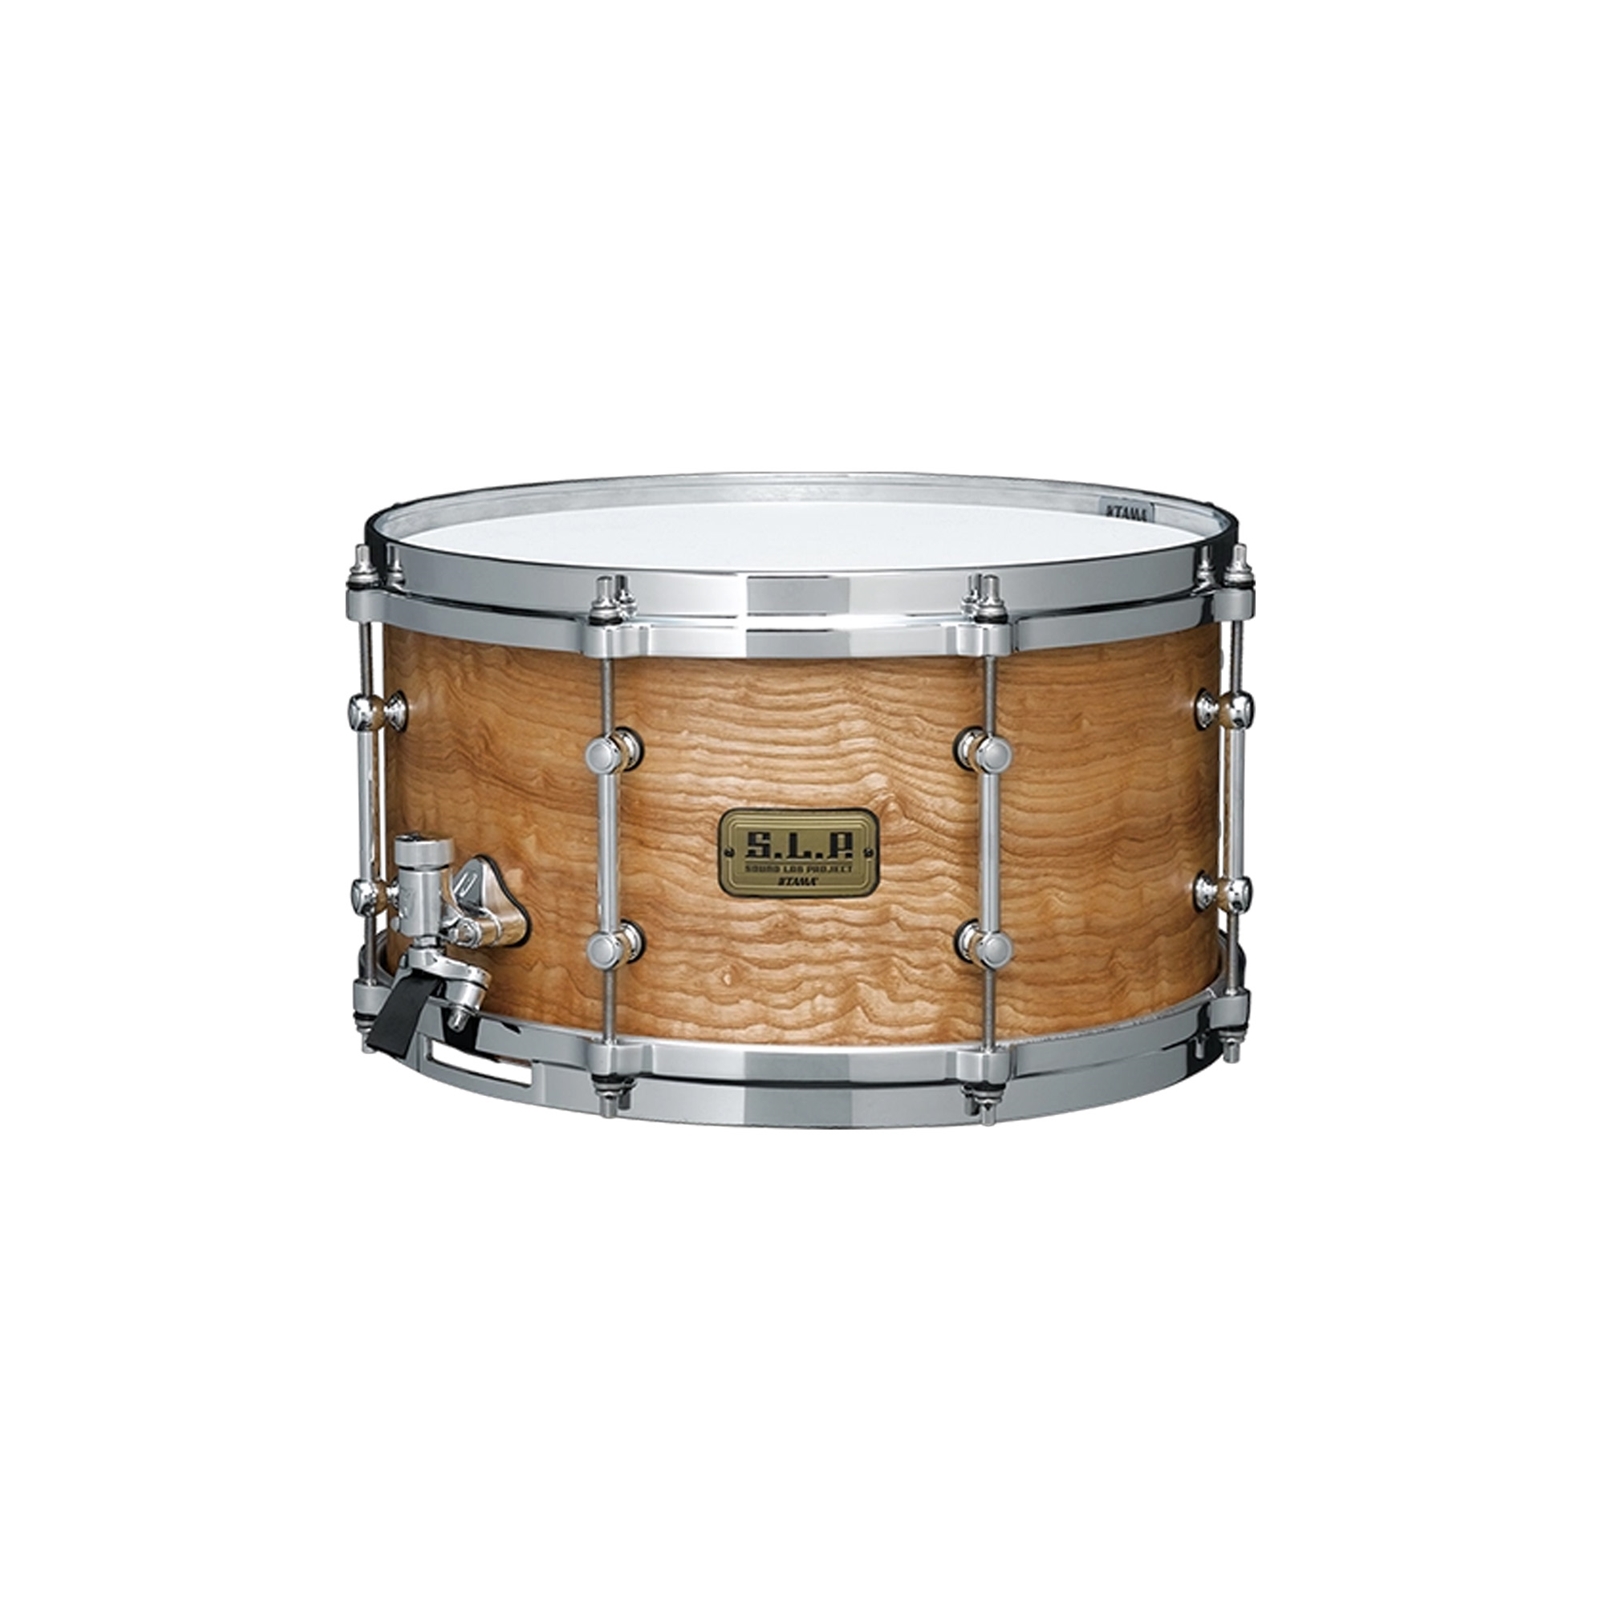 Tama LGM1367STA Sound Lab Project Snare Drum